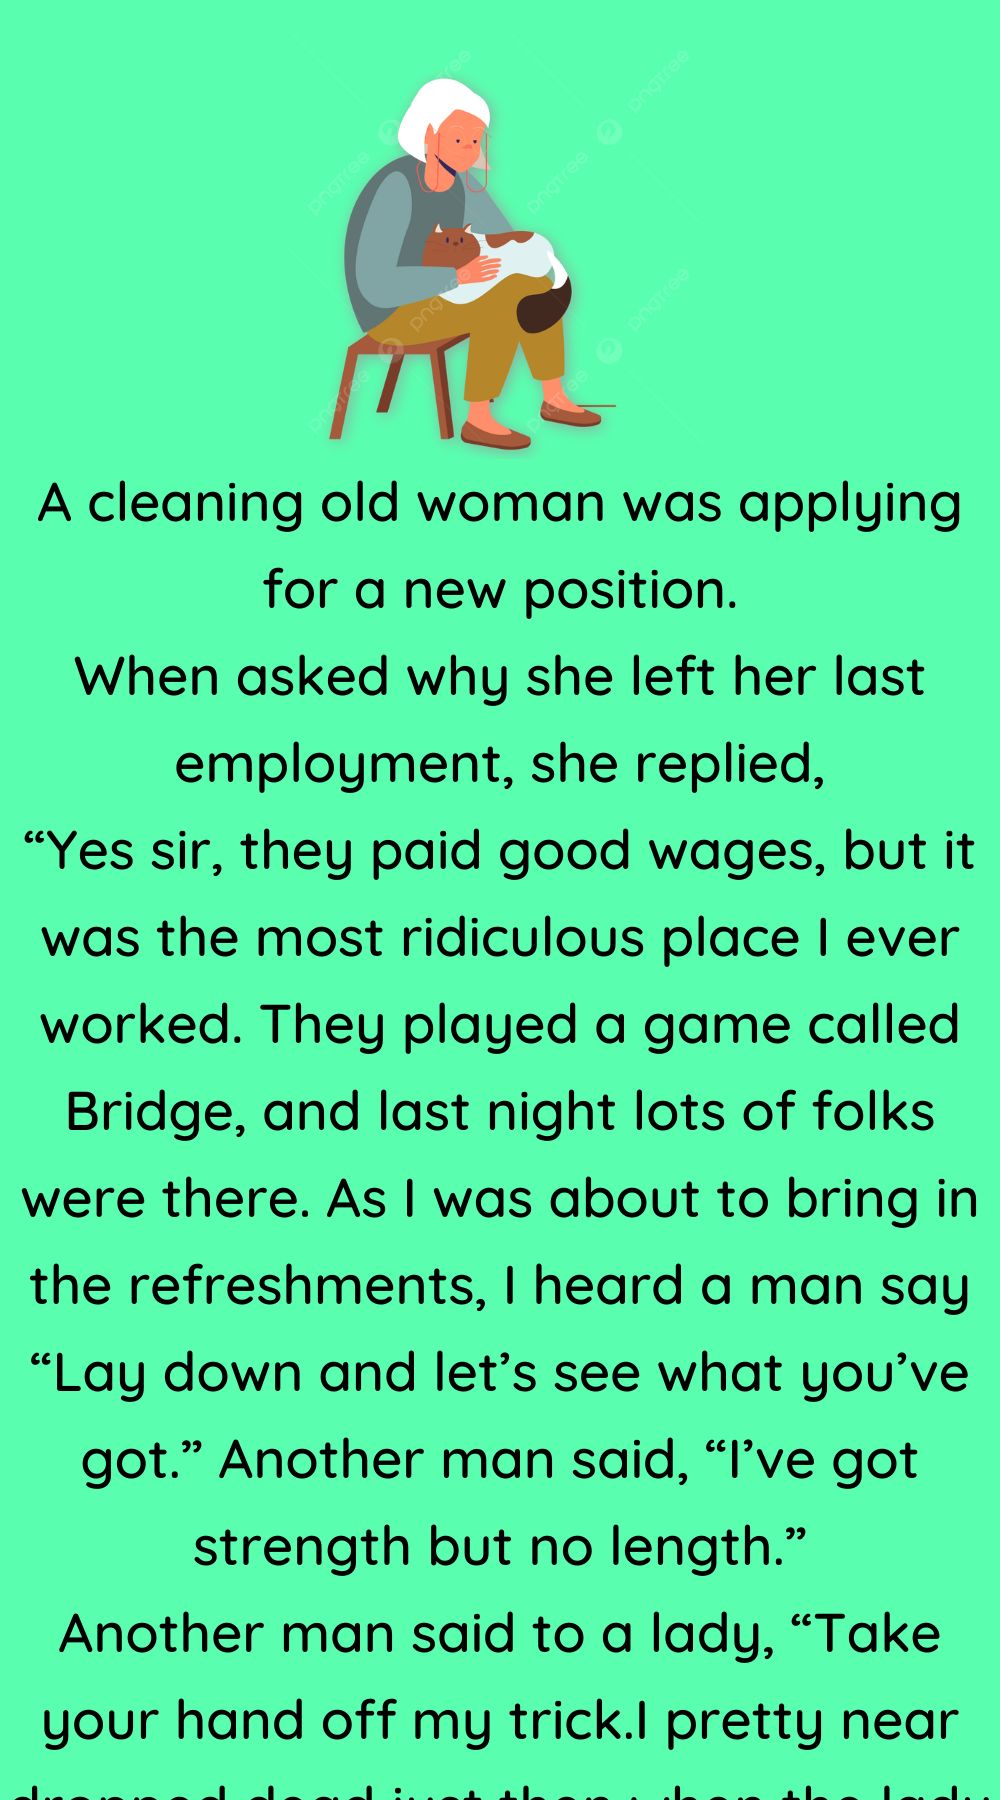 A cleaning old woman was applying